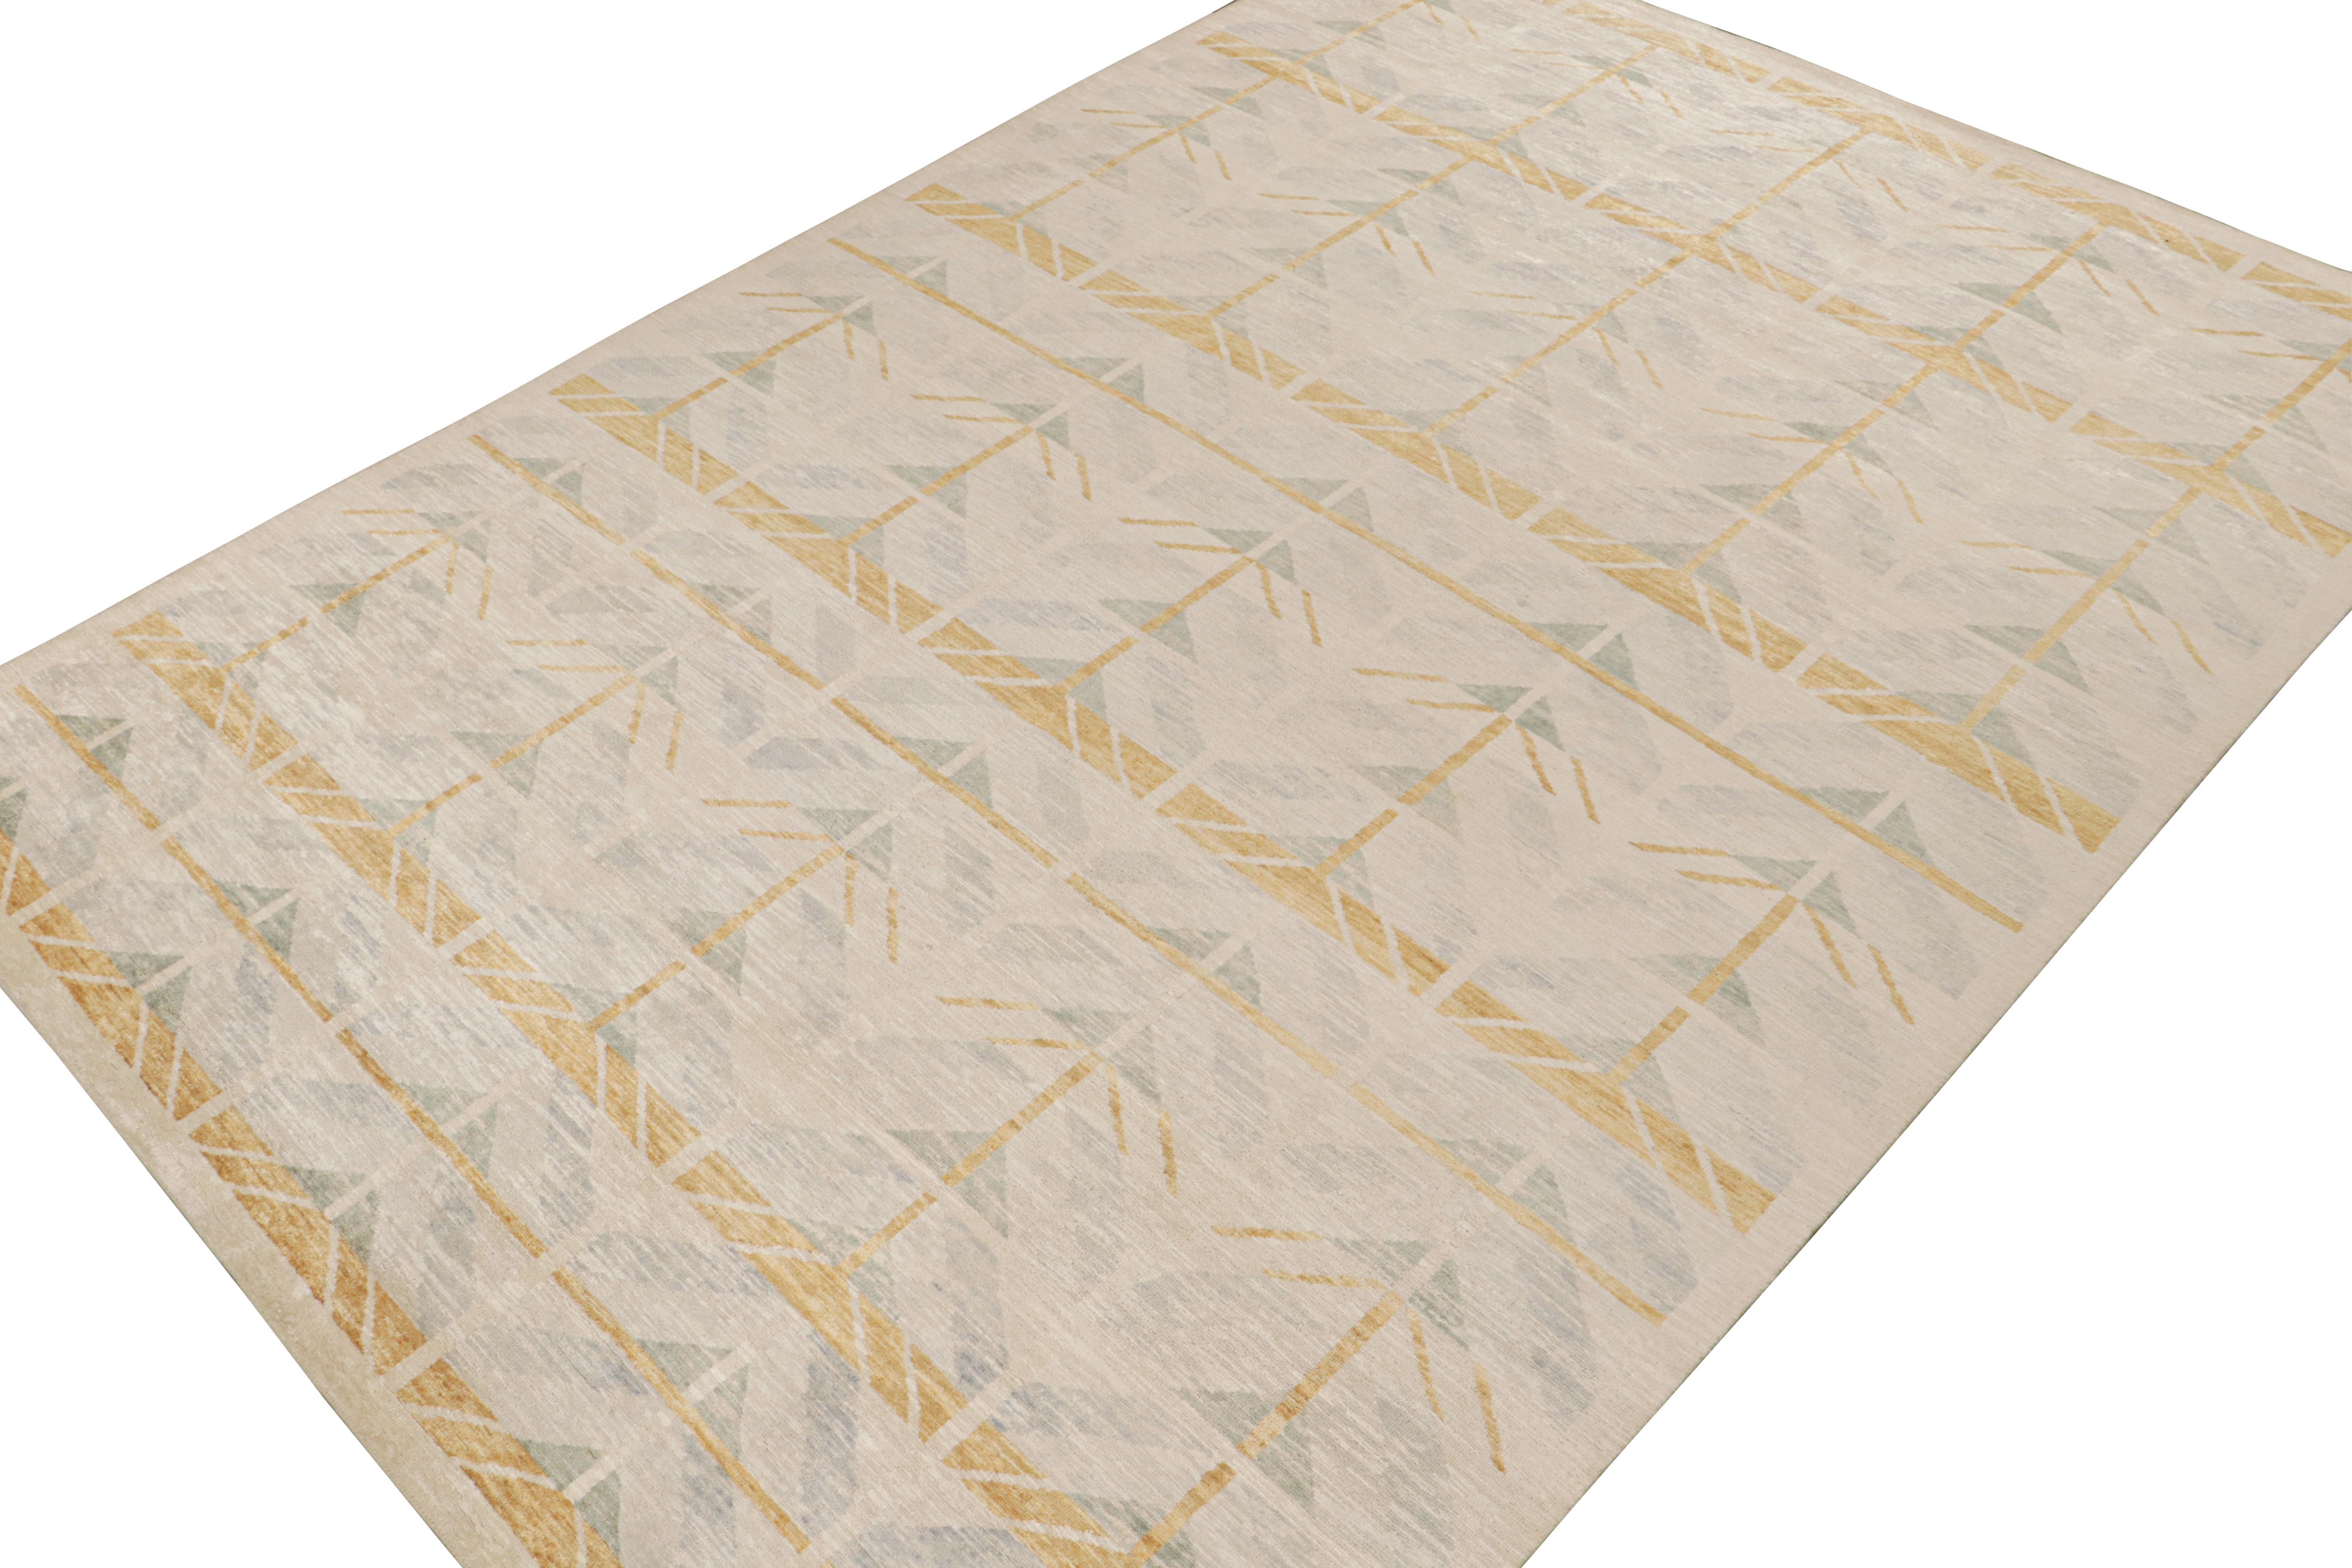 Indian Rug & Kilim’s Scandinavian-Style Rug with Gold & Beige Geometric Patterns  For Sale